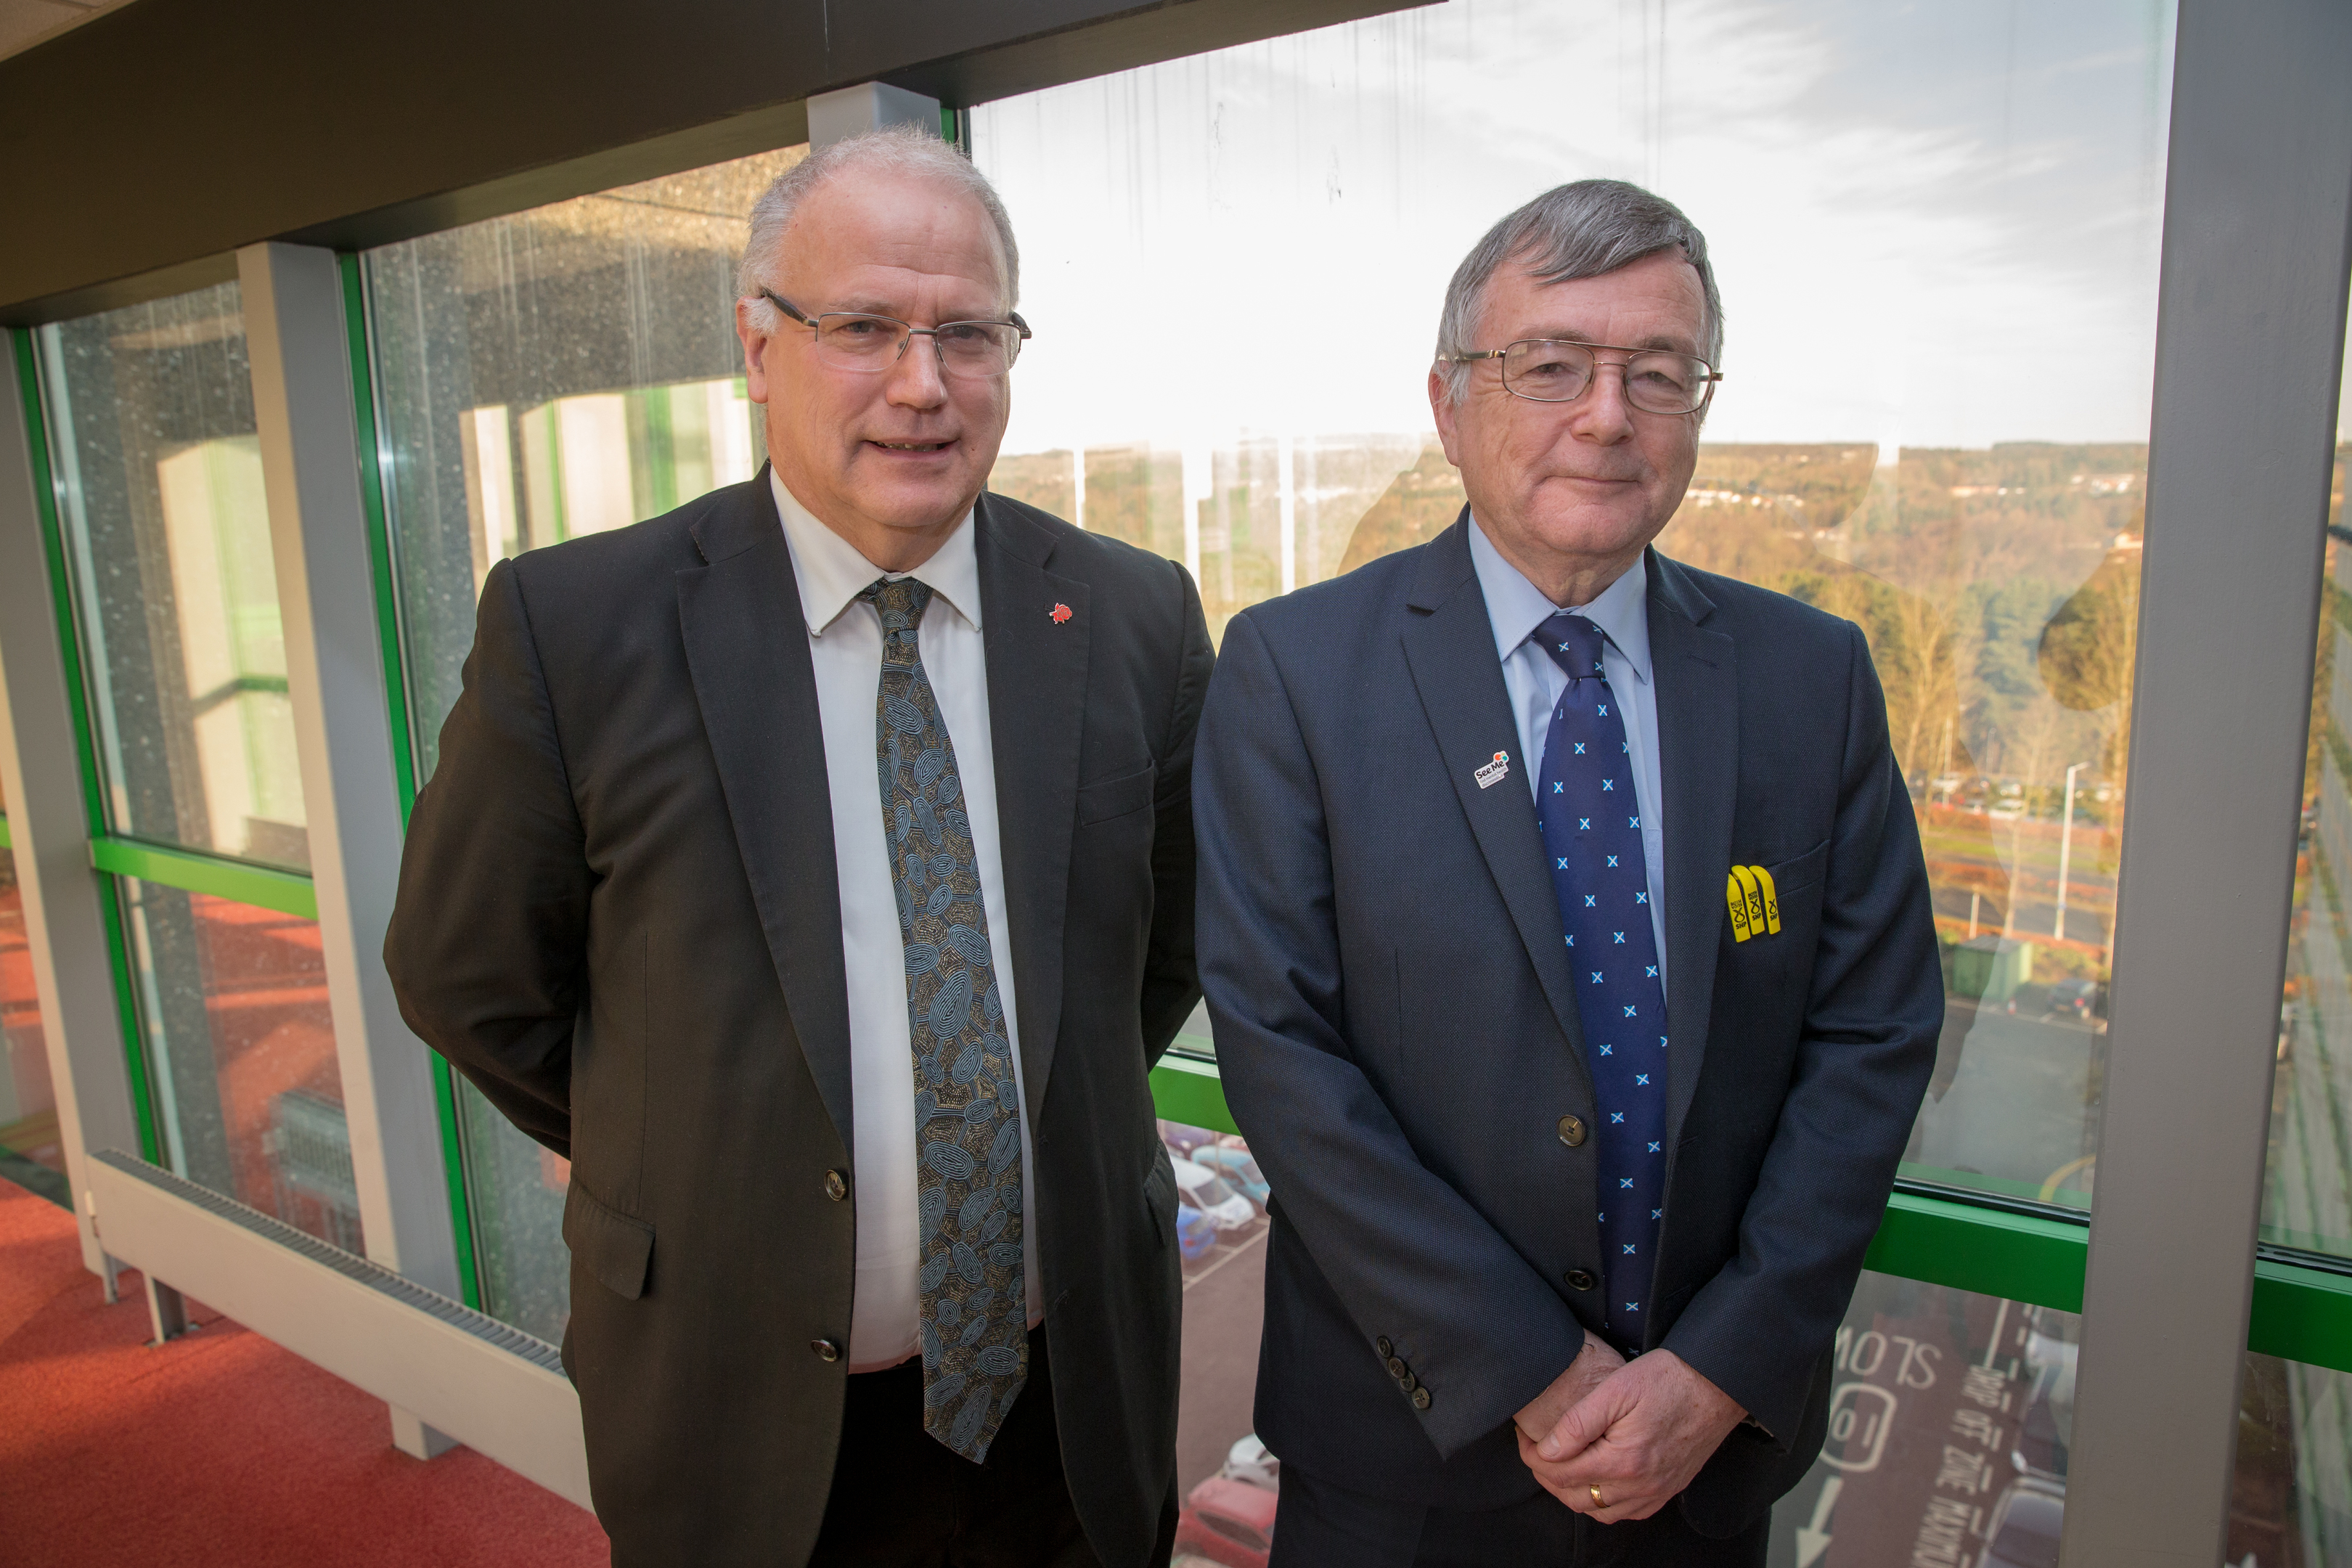 Joint Council leaders David Ross and David Alexander at Fife House in Glenrothes.